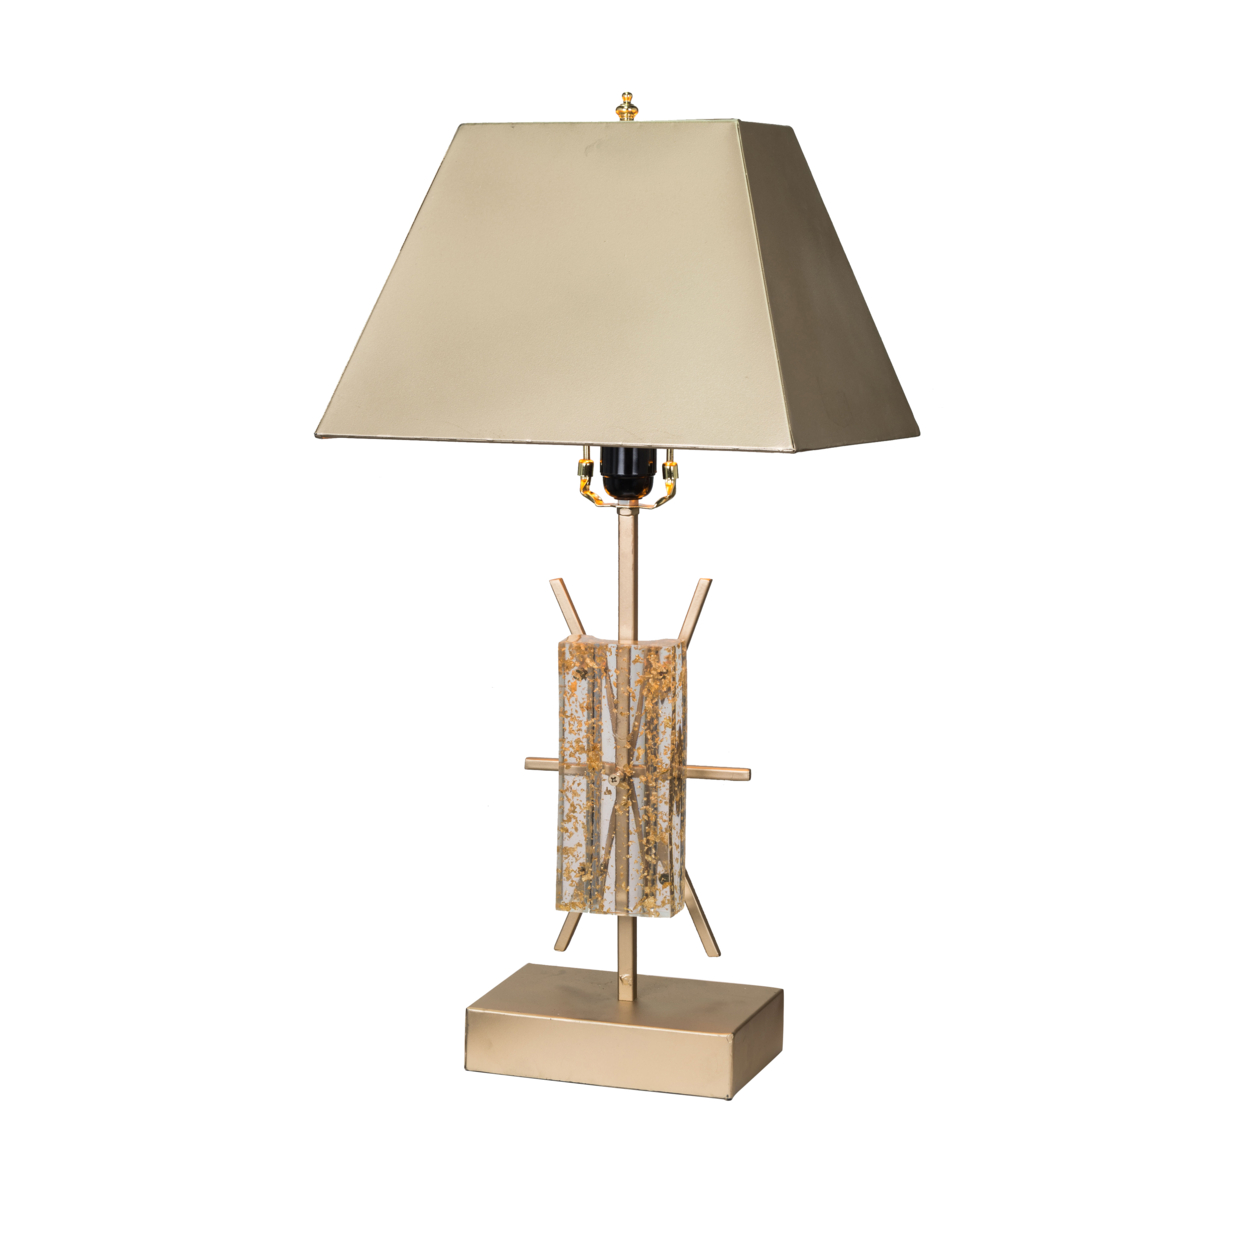 26 Inch Modern Accent Table Lamp, Metal And Acrylic Frame, Champagne Gold, Saltoro Sherpi